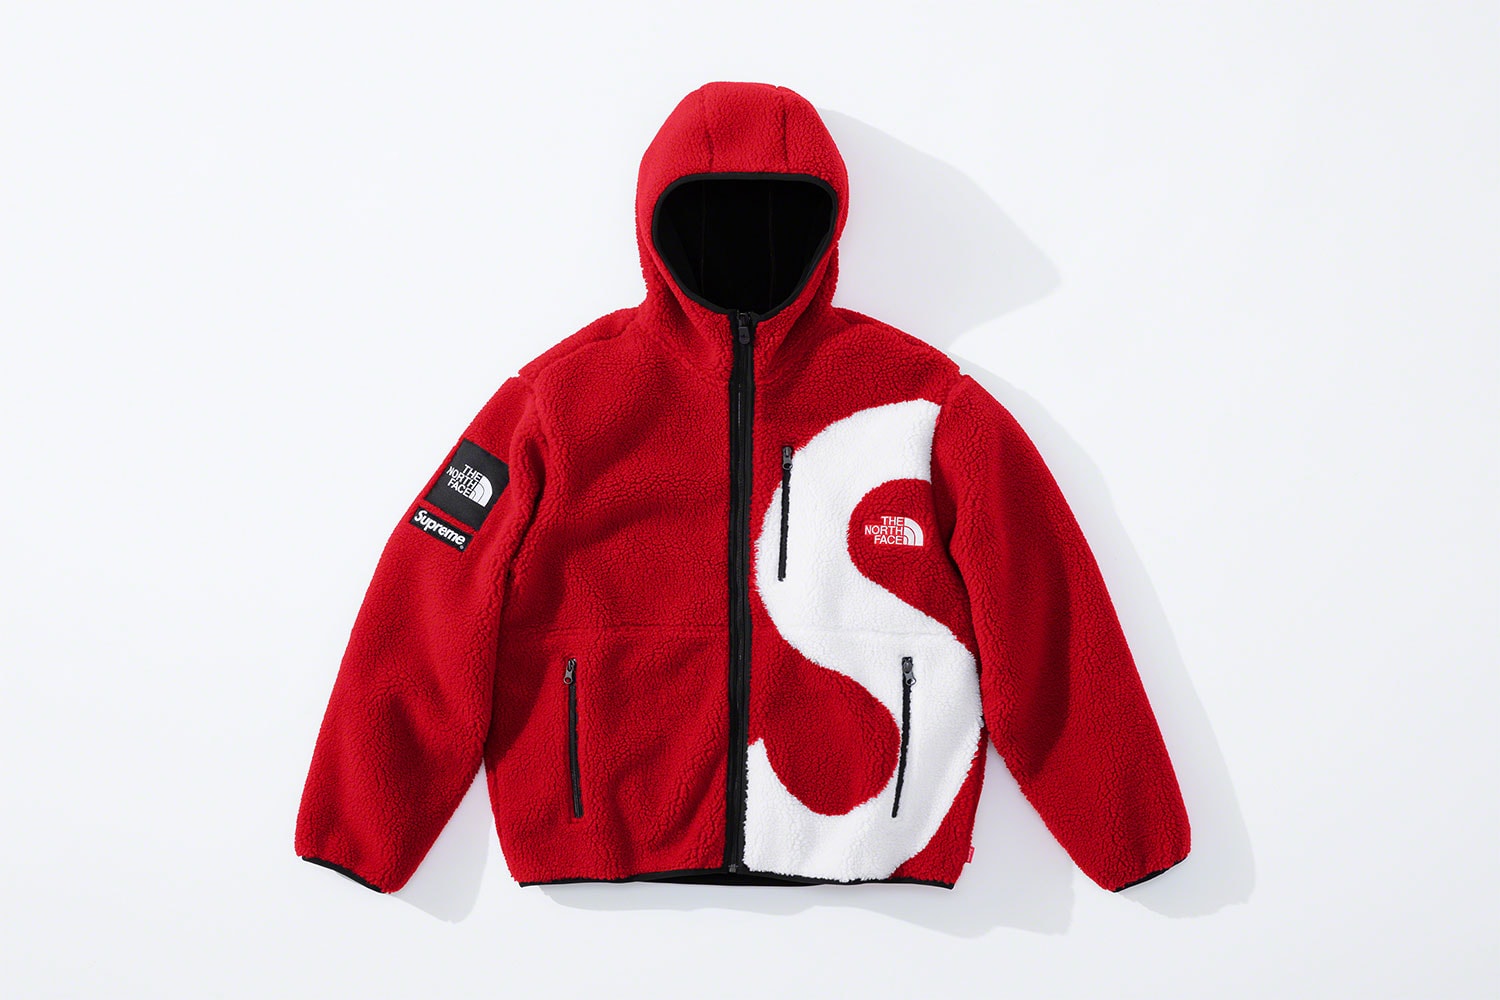 Supreme x The North Face Fall 2020 Collection Info Summit Series Himalayan Parka Mountain Jacket Hooded Fleece Jacket Expedition Backpack Shoulder Bag Dolomite 3S-20° Sleeping Bag Nuptse Mitts